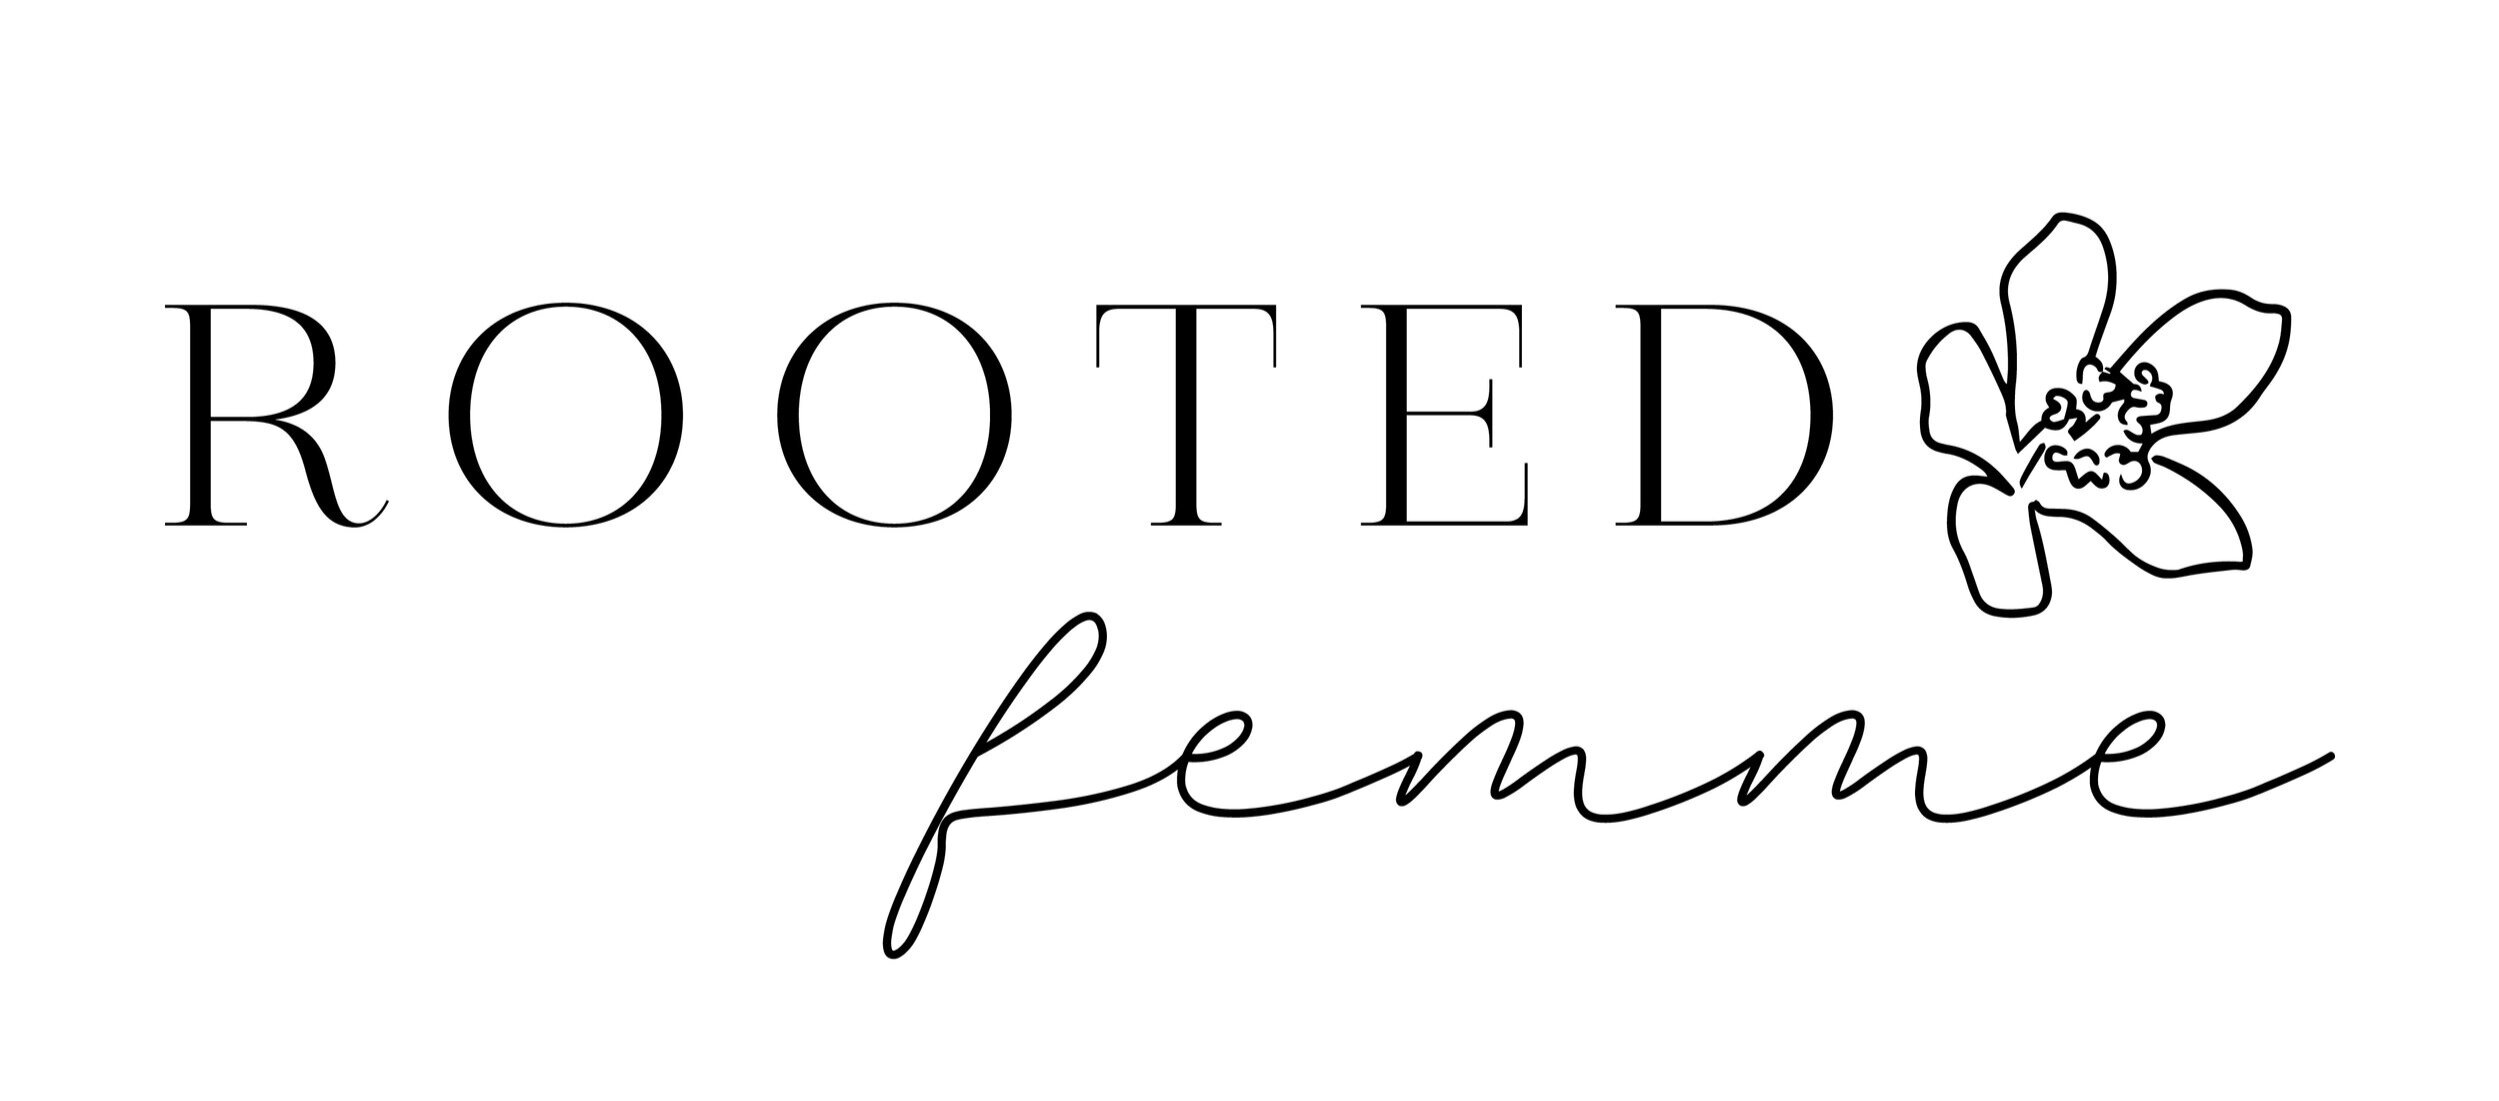 Rooted Femme